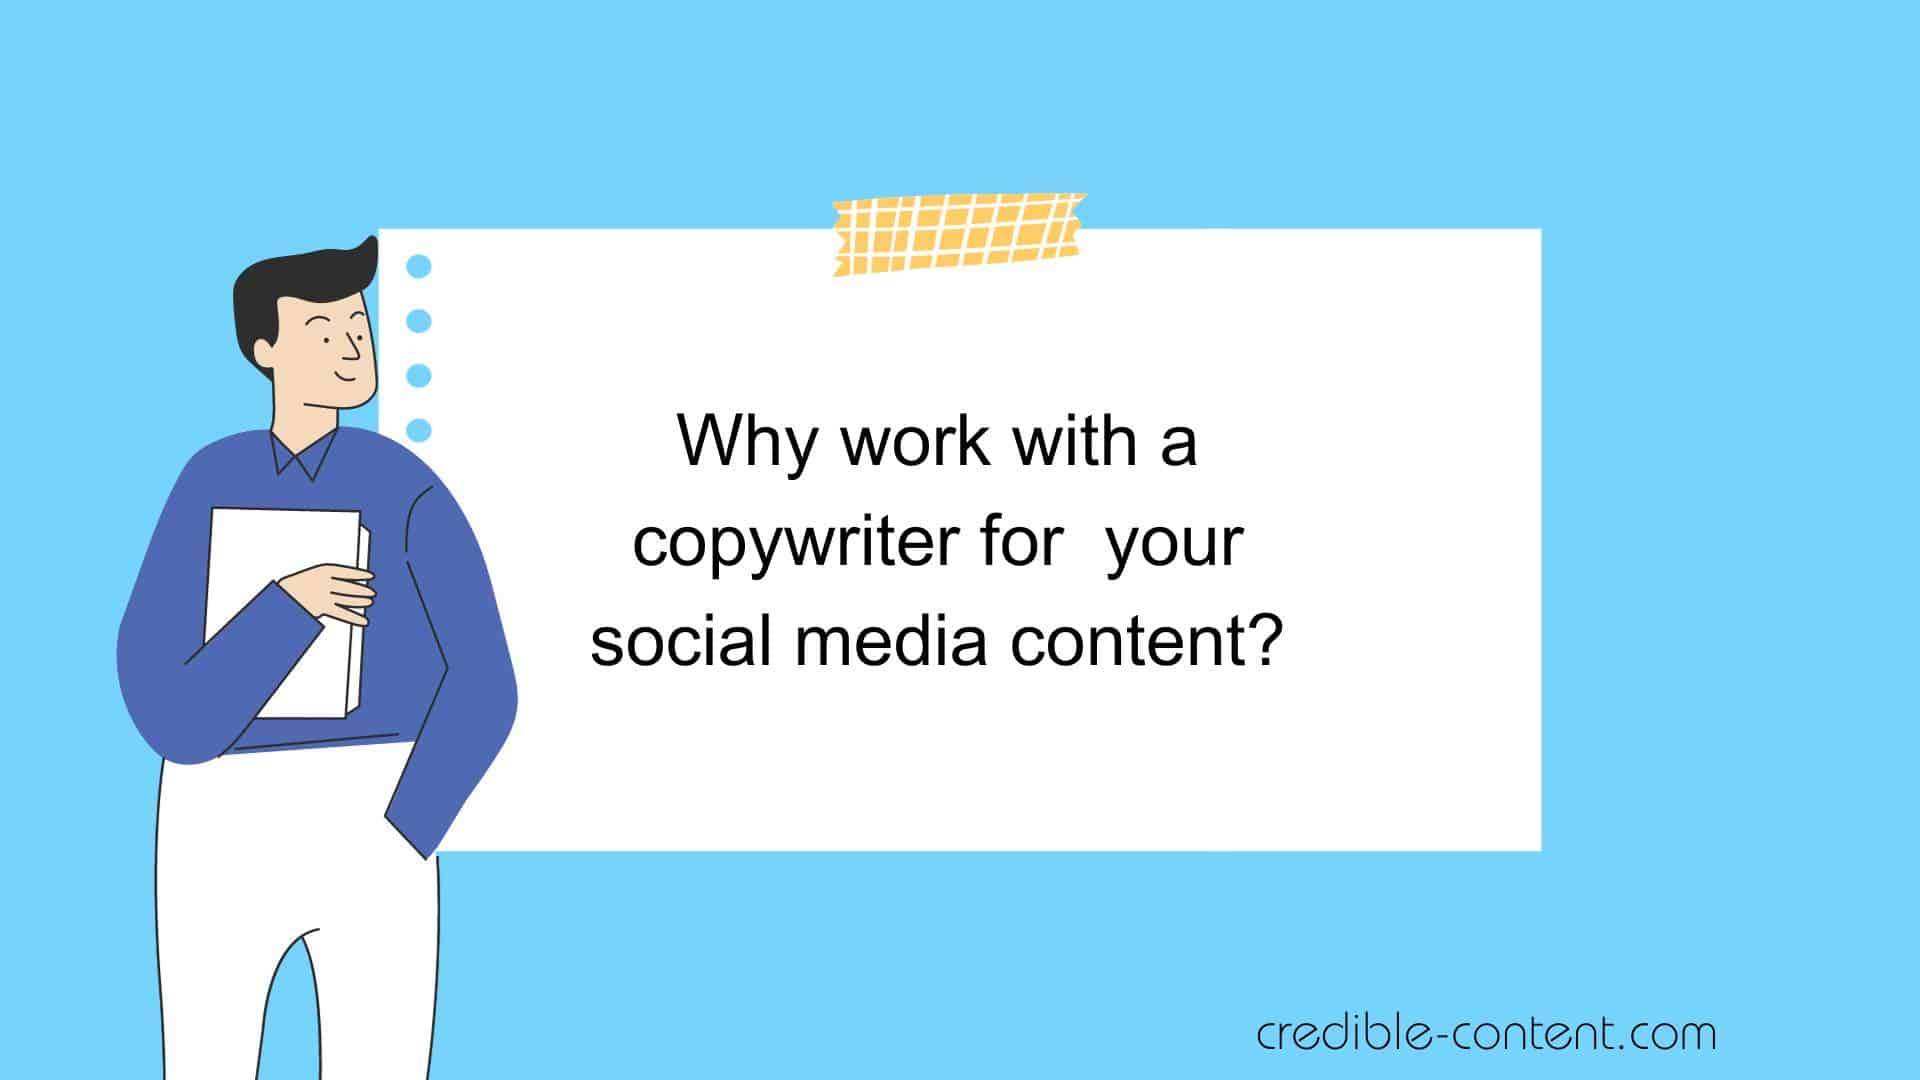 Why work with a copywriter for your social media content